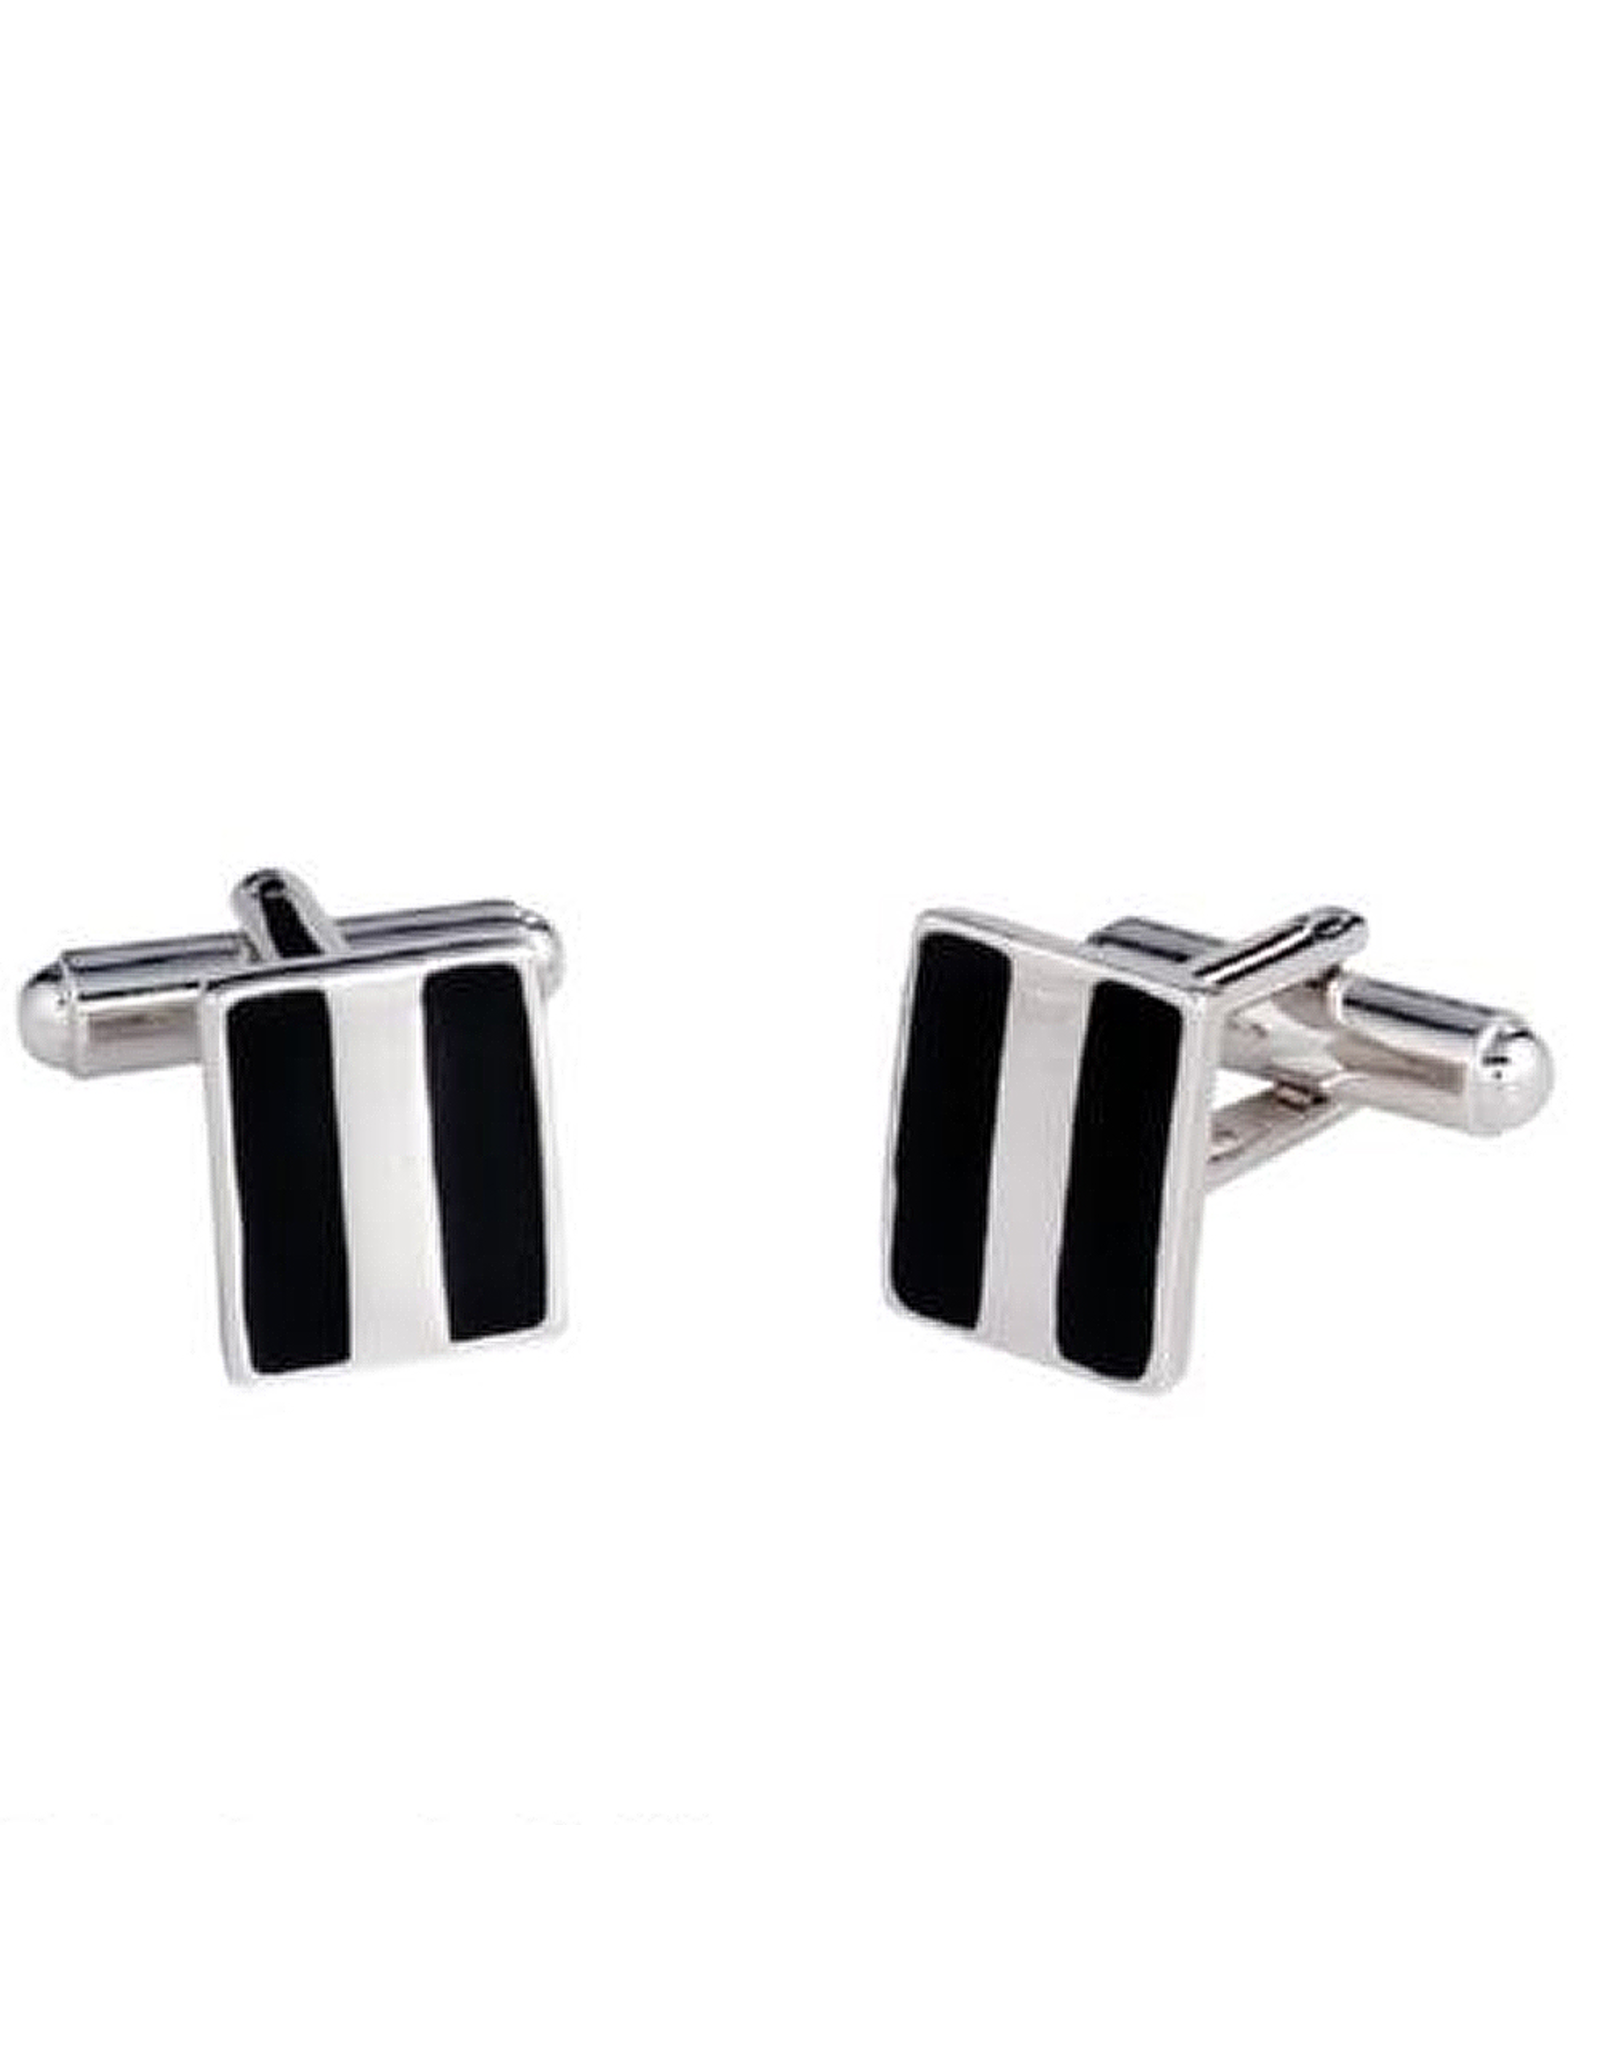 Annaleece Cuff Links Black and Silver | Mens Collection